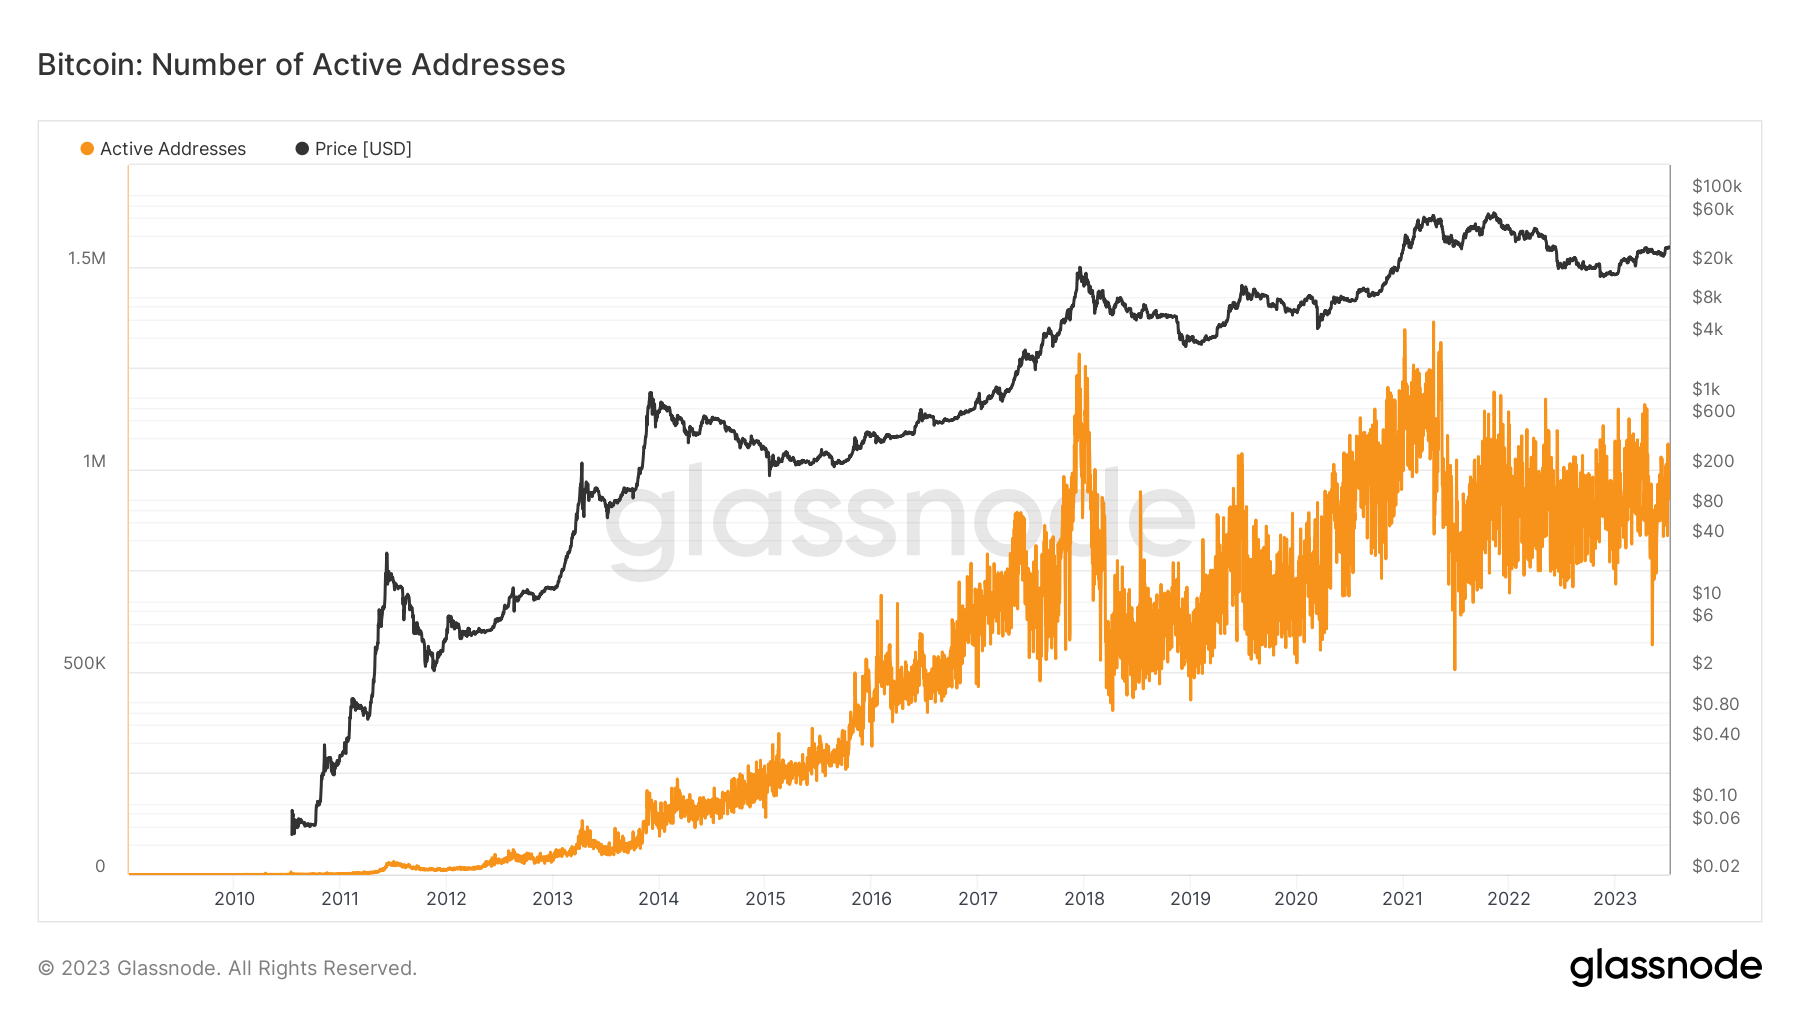 This chart shows the number of active addresses on the Bitcoin network.